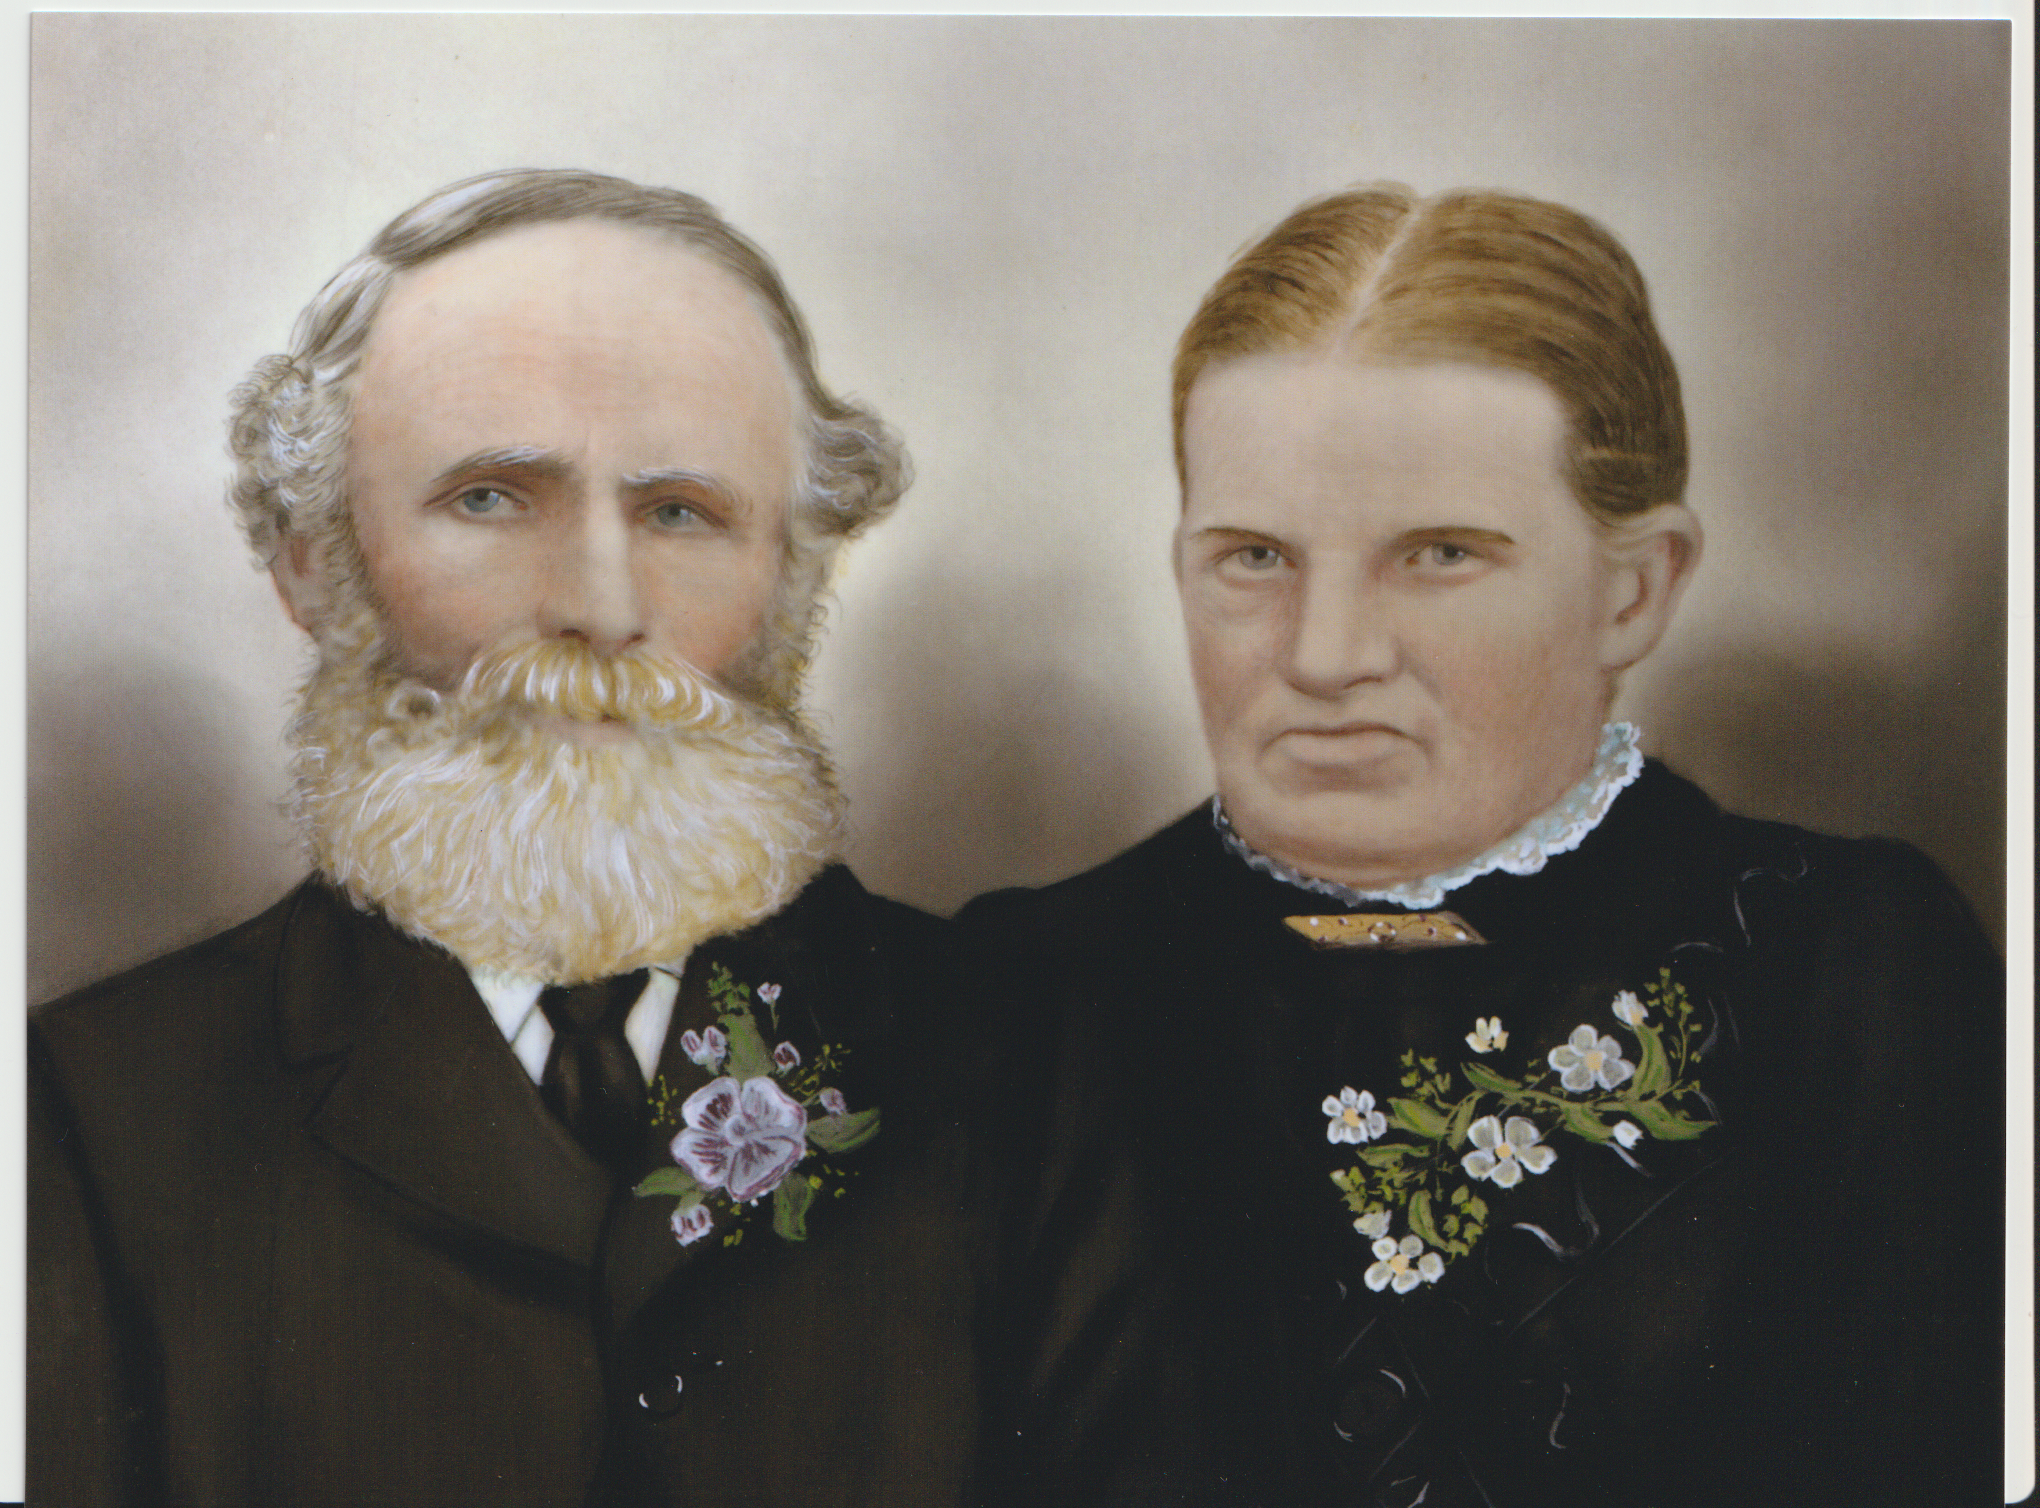 Hand-coloured studio portrait of a man and woman. The man has a white beard and mustache. The woman is in a dark high necked dress and has light brown hair.